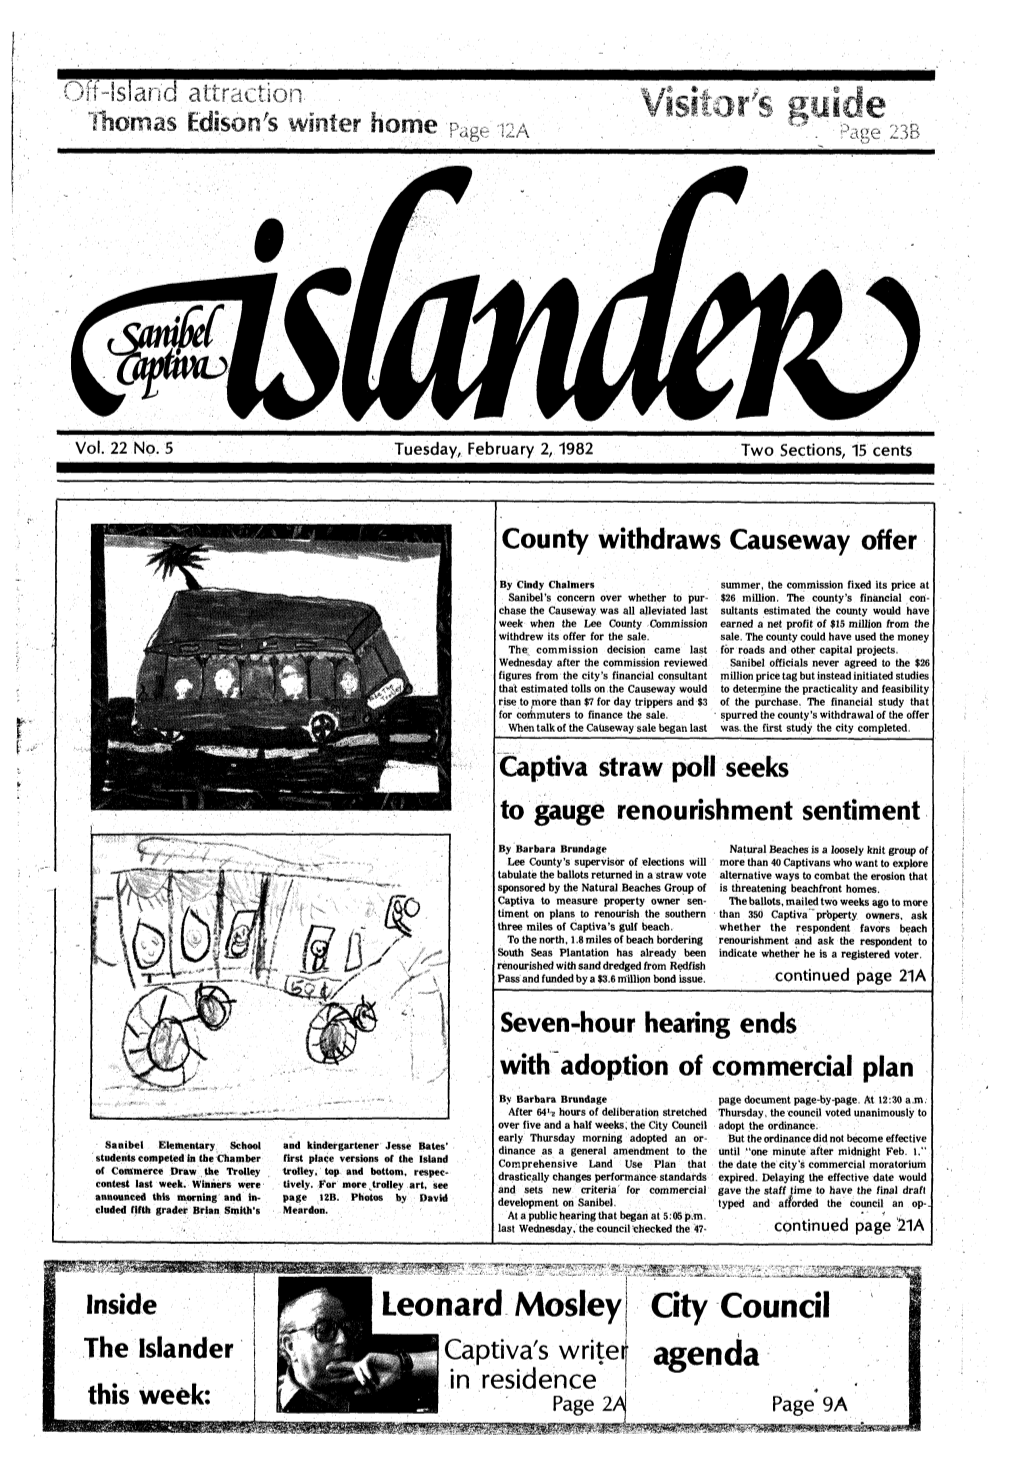 Agenda This Week: in Residence Page Page 9A 2A Tuesday, February 2,1982 the ISLANDER Leonard Mosley Captiva's Writer in Residence Recounts Colorful People, Places